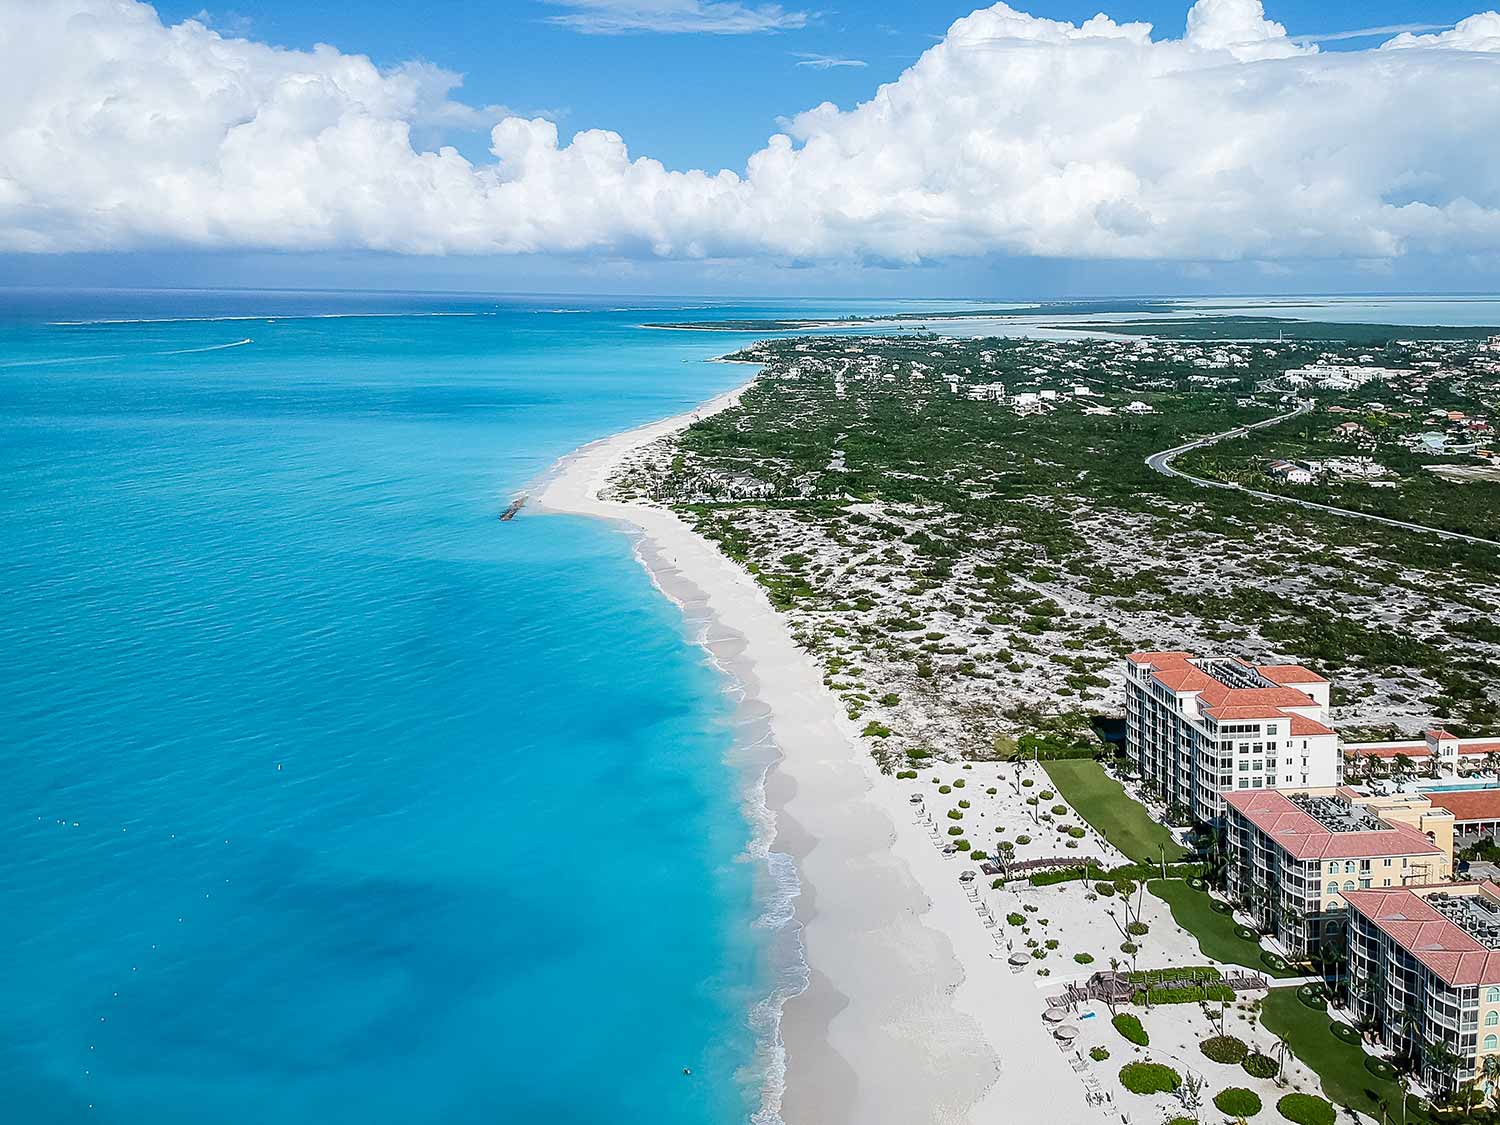 Aerial view of Grace Bay Beach in Turks and Caicos, widely regarded as one of the best beaches in the Caribbean.